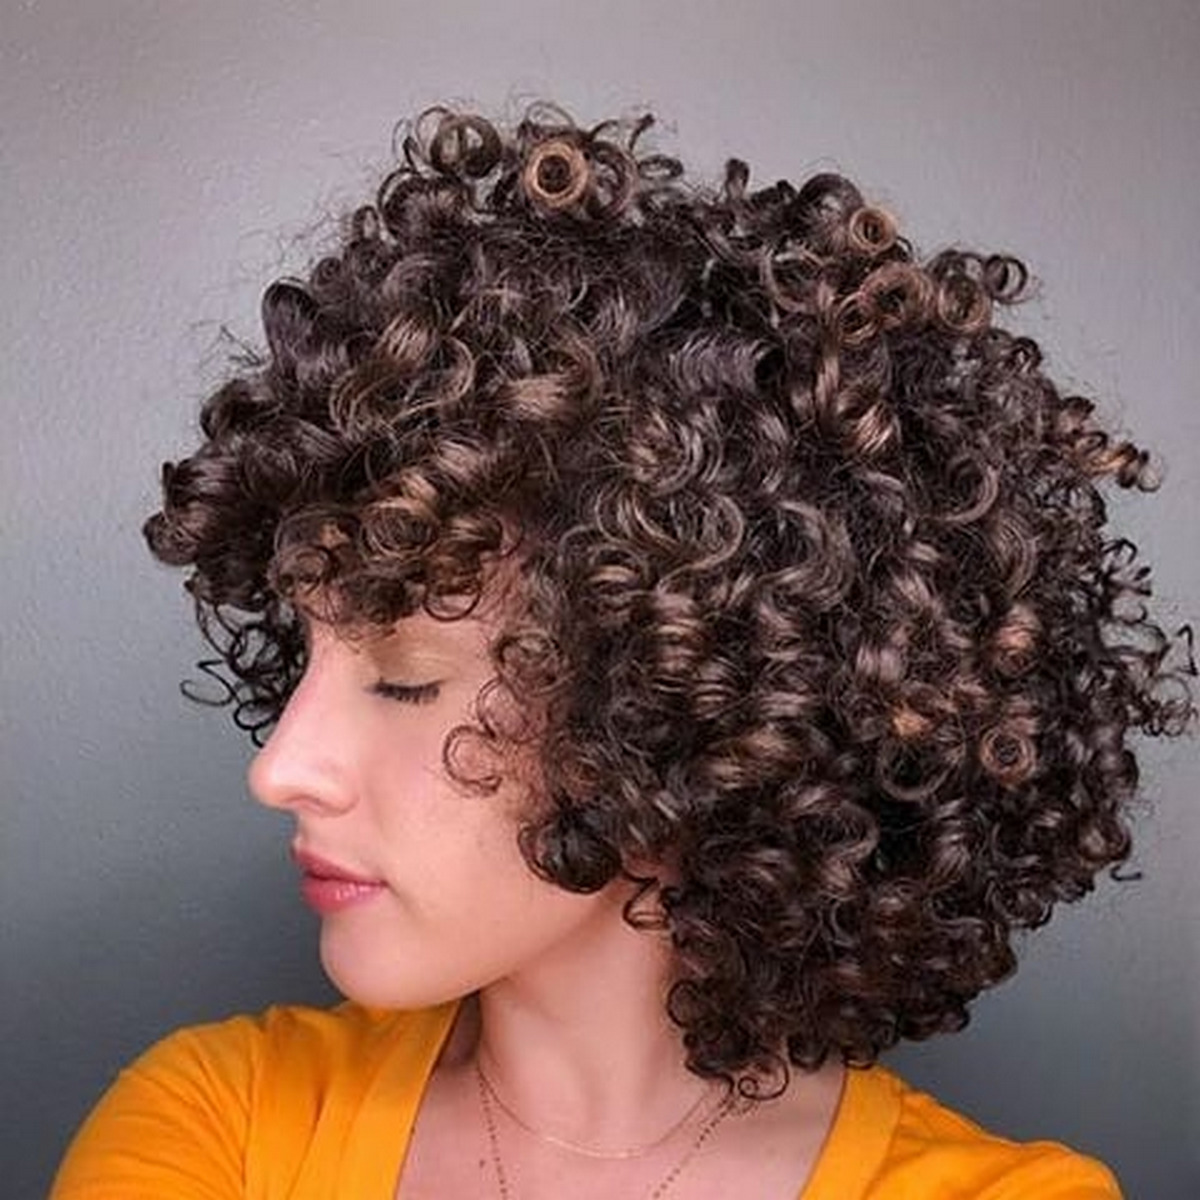 Natural texture and medium-sized curls of the 3B hair bring 